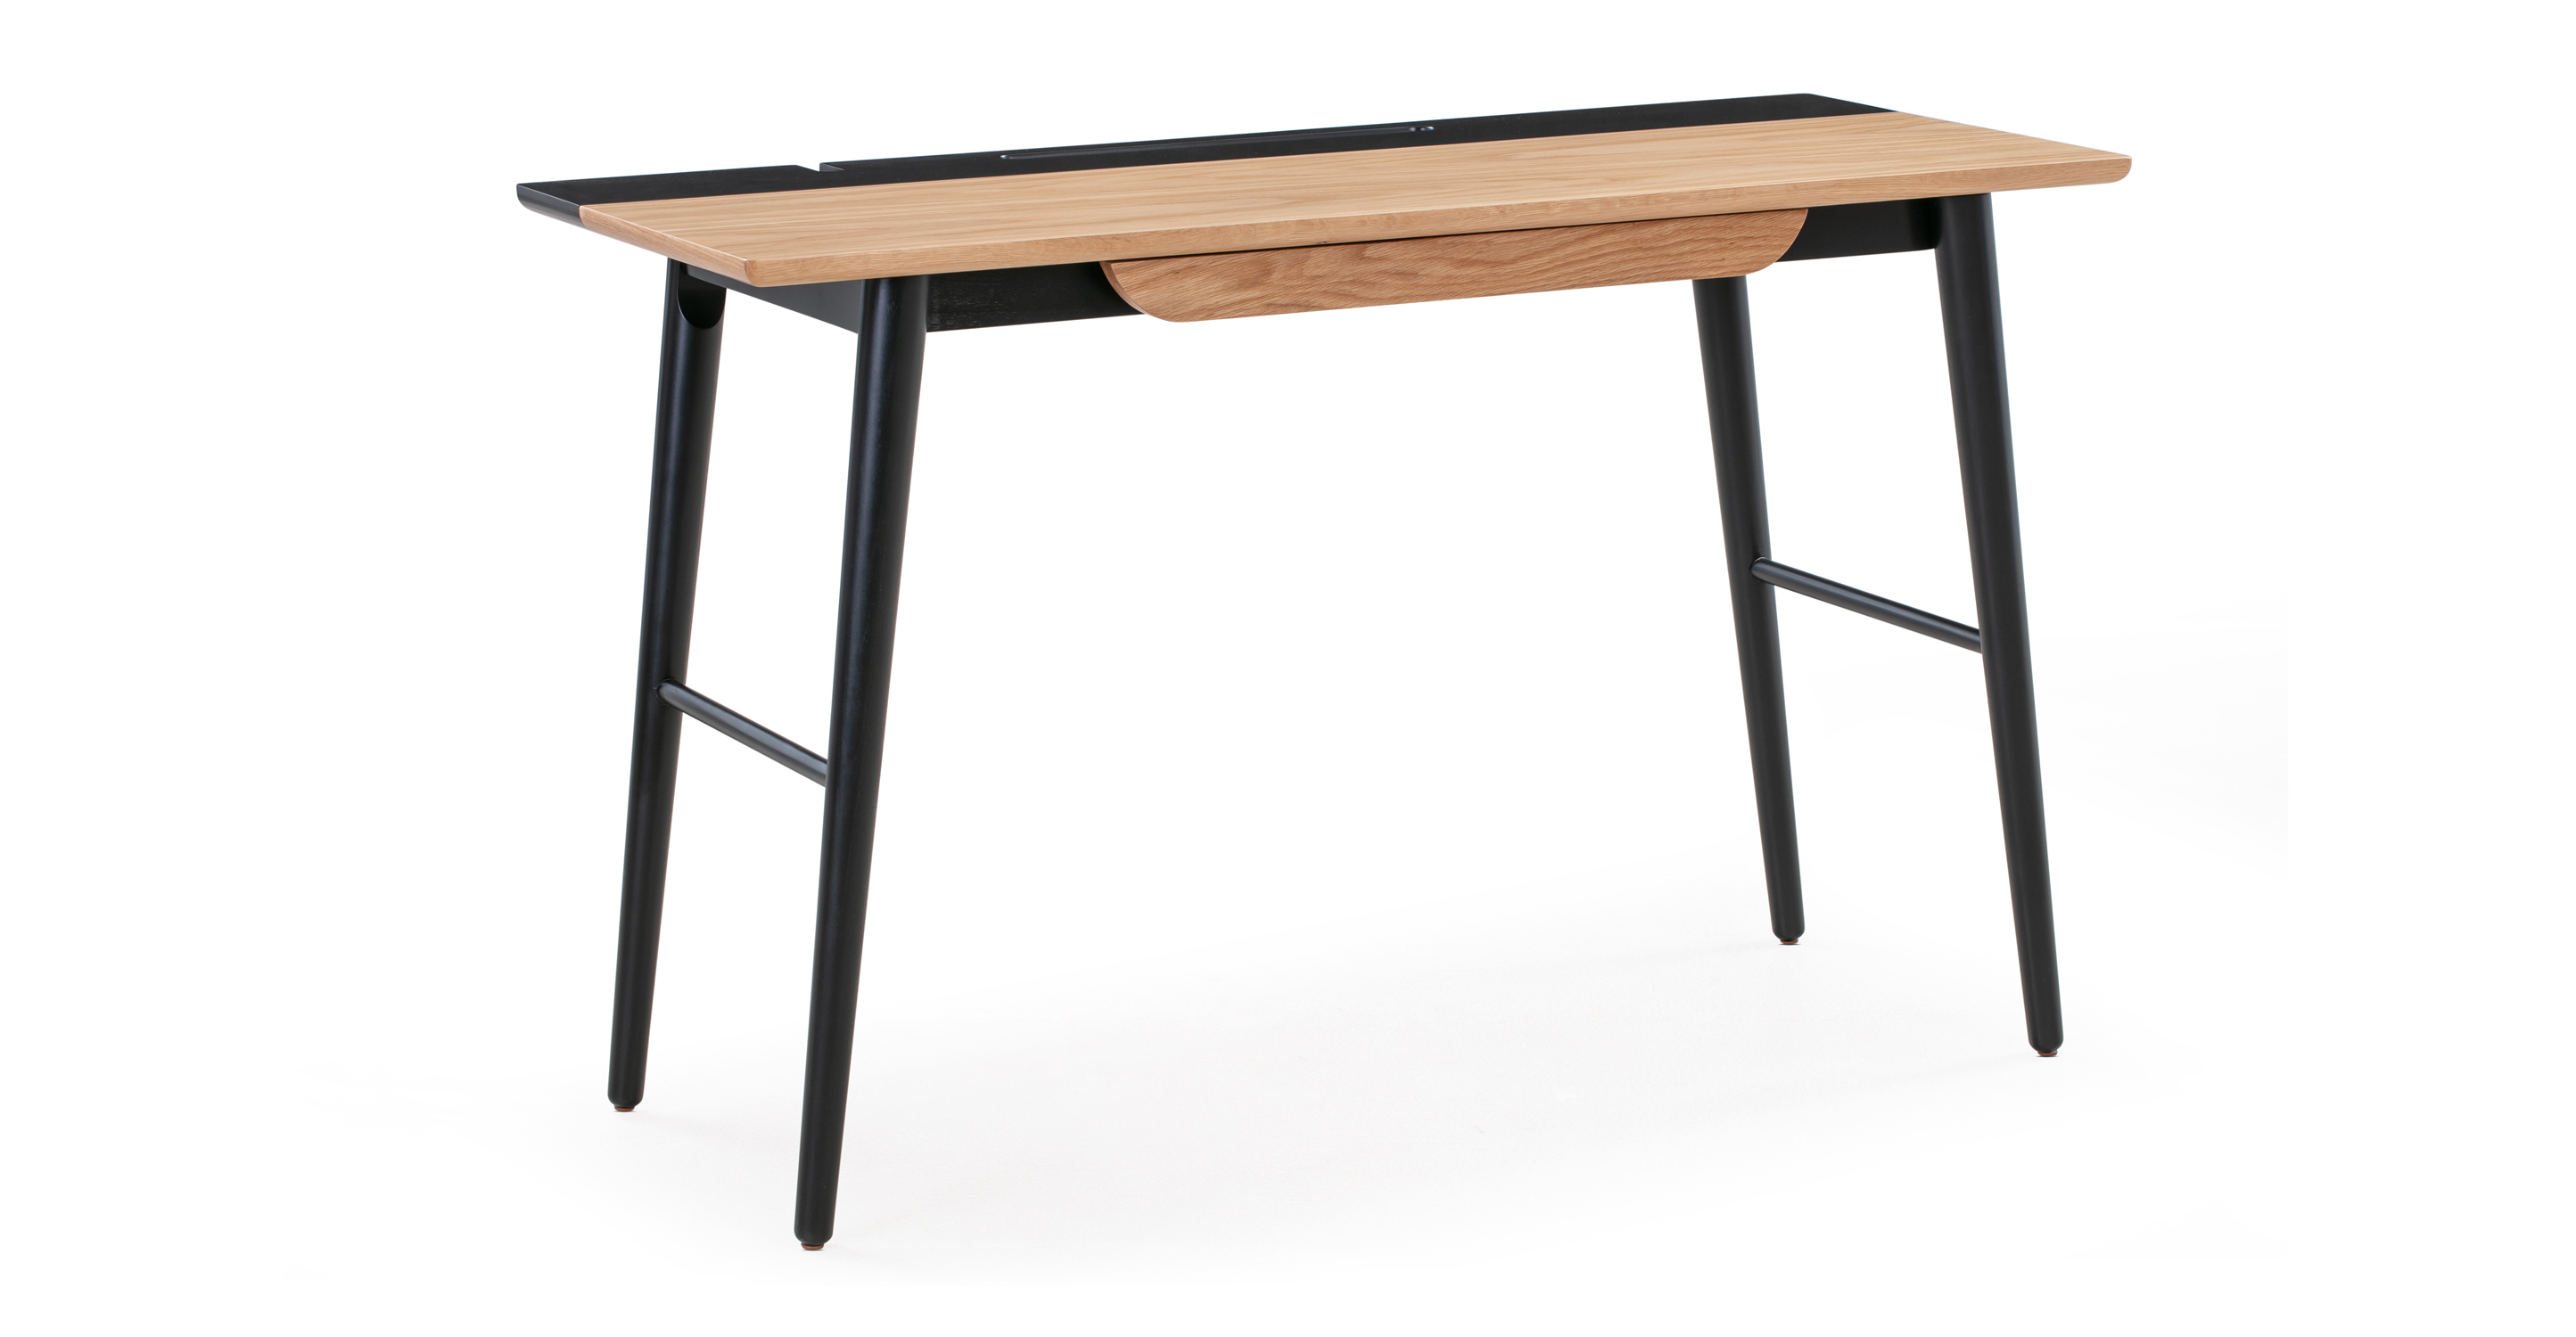 Oak table-top with four, black, slightly angled, legs. The legs have cross supports connecting the two ends which provides support but could also be used to hang items from. The desk has a single narrow profile drawer that will work for desk supplies like pens, rulers, etc. There are indentations and notches on the back to give space to cables or supplies like pens etc. 